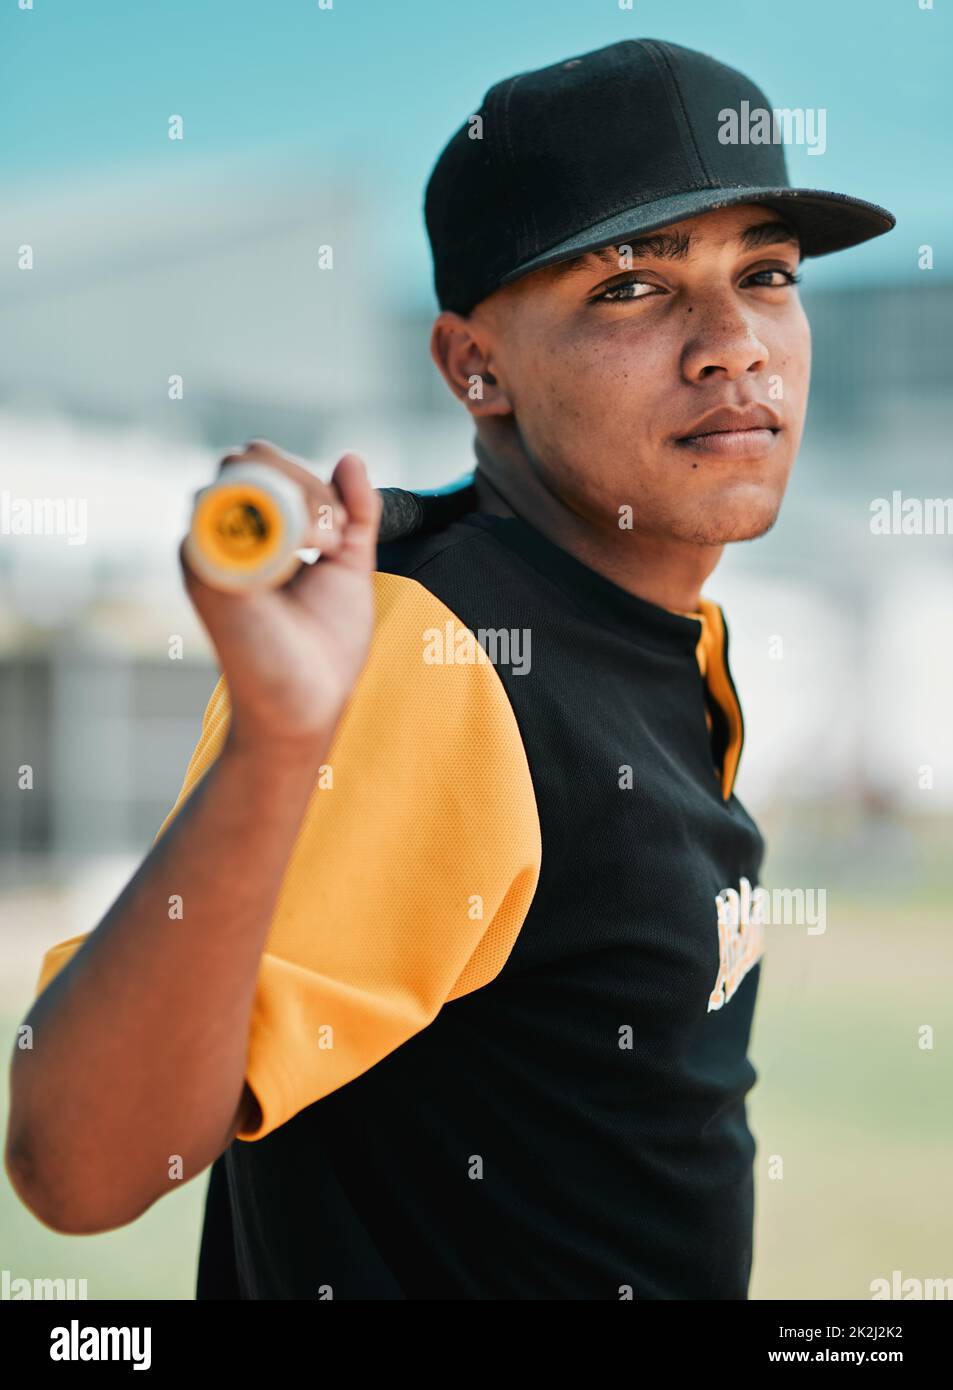 I dont run away from challenges, I run over them. Shot of a young baseball player holding a baseball bat while posing outside on the pitch. Stock Photo